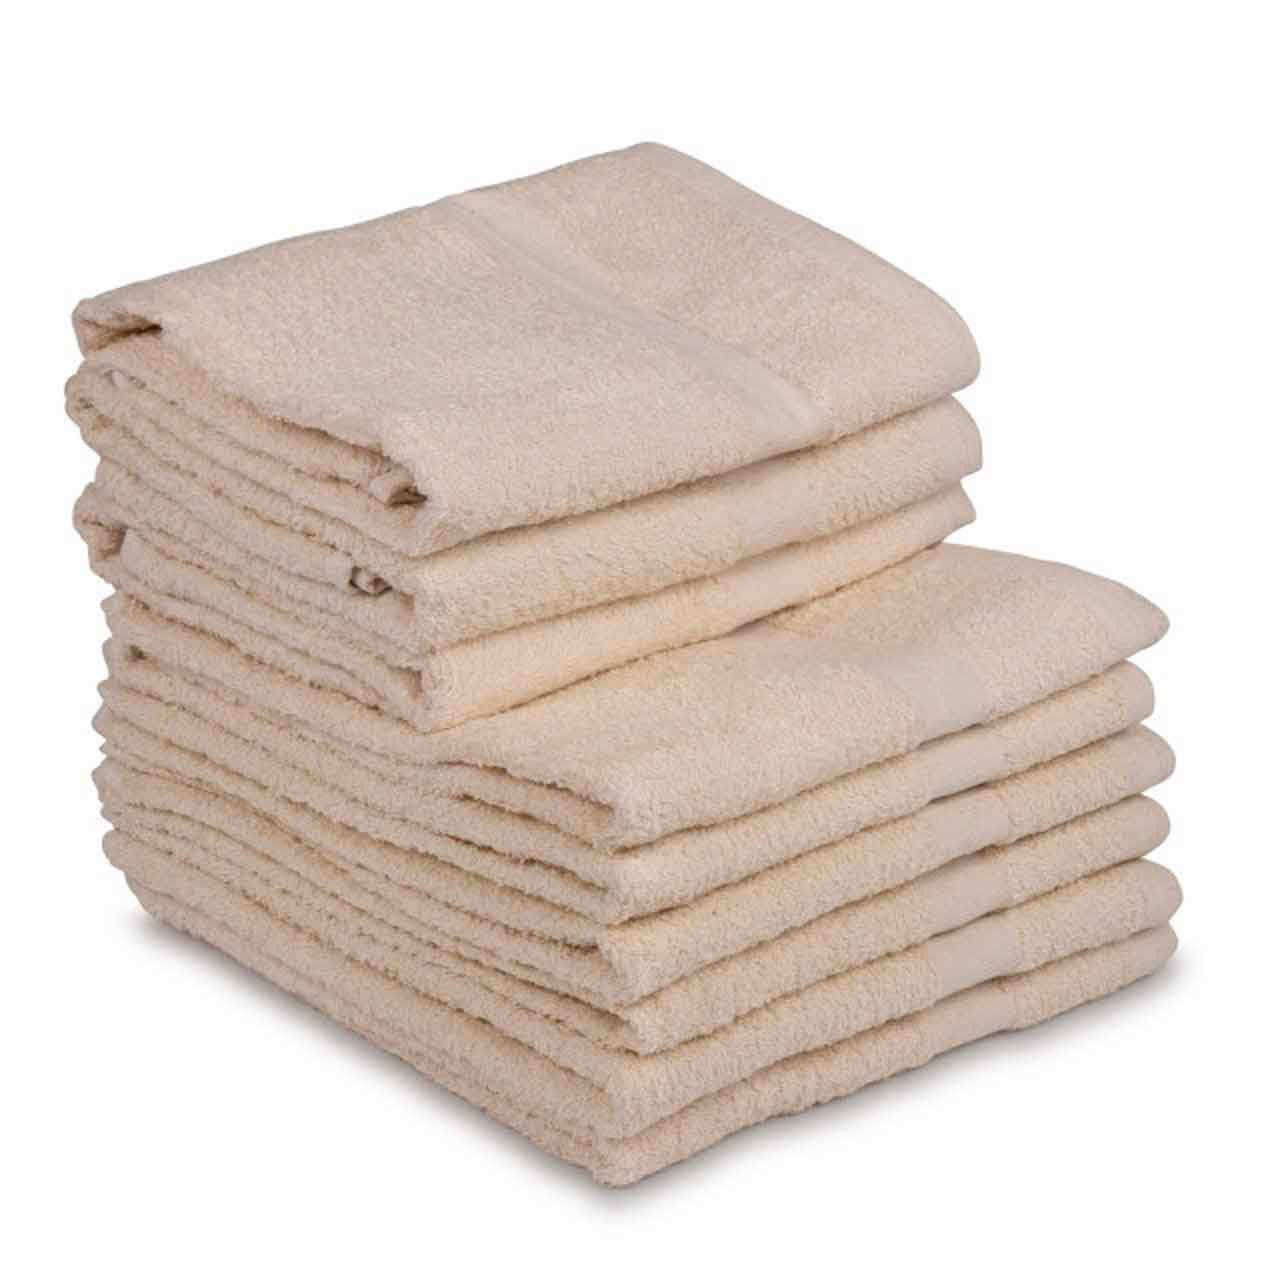 How many old towels should you keep?